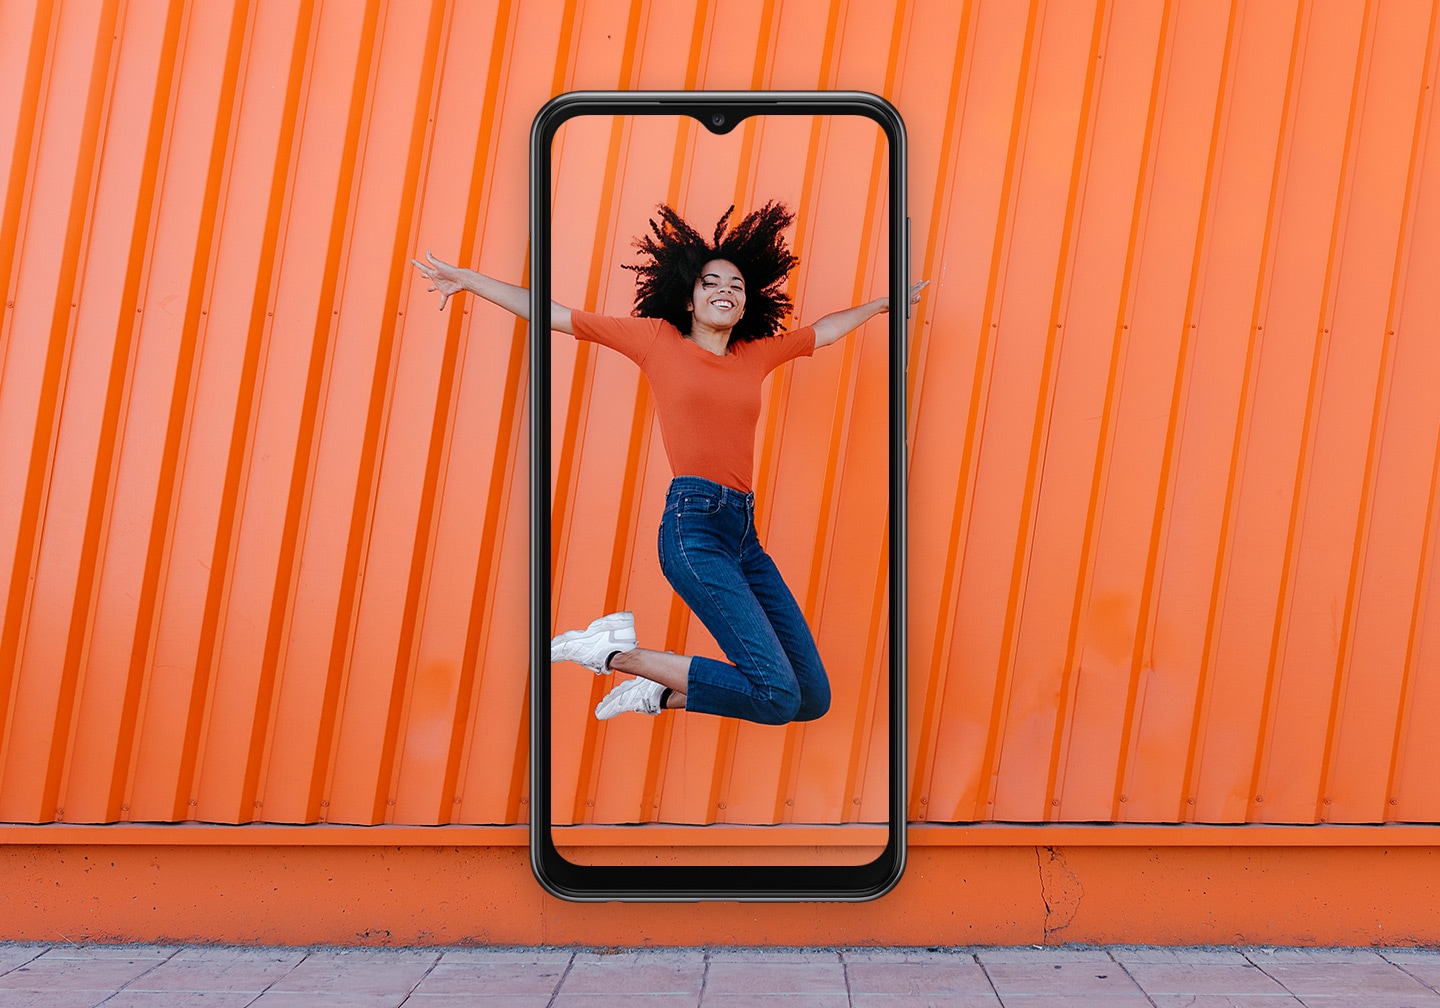 Stay tuned for Galaxy A23 release date. A Samsung Galaxy A23 captures a woman, smiling and in mid-jump, in front of an orange wall background